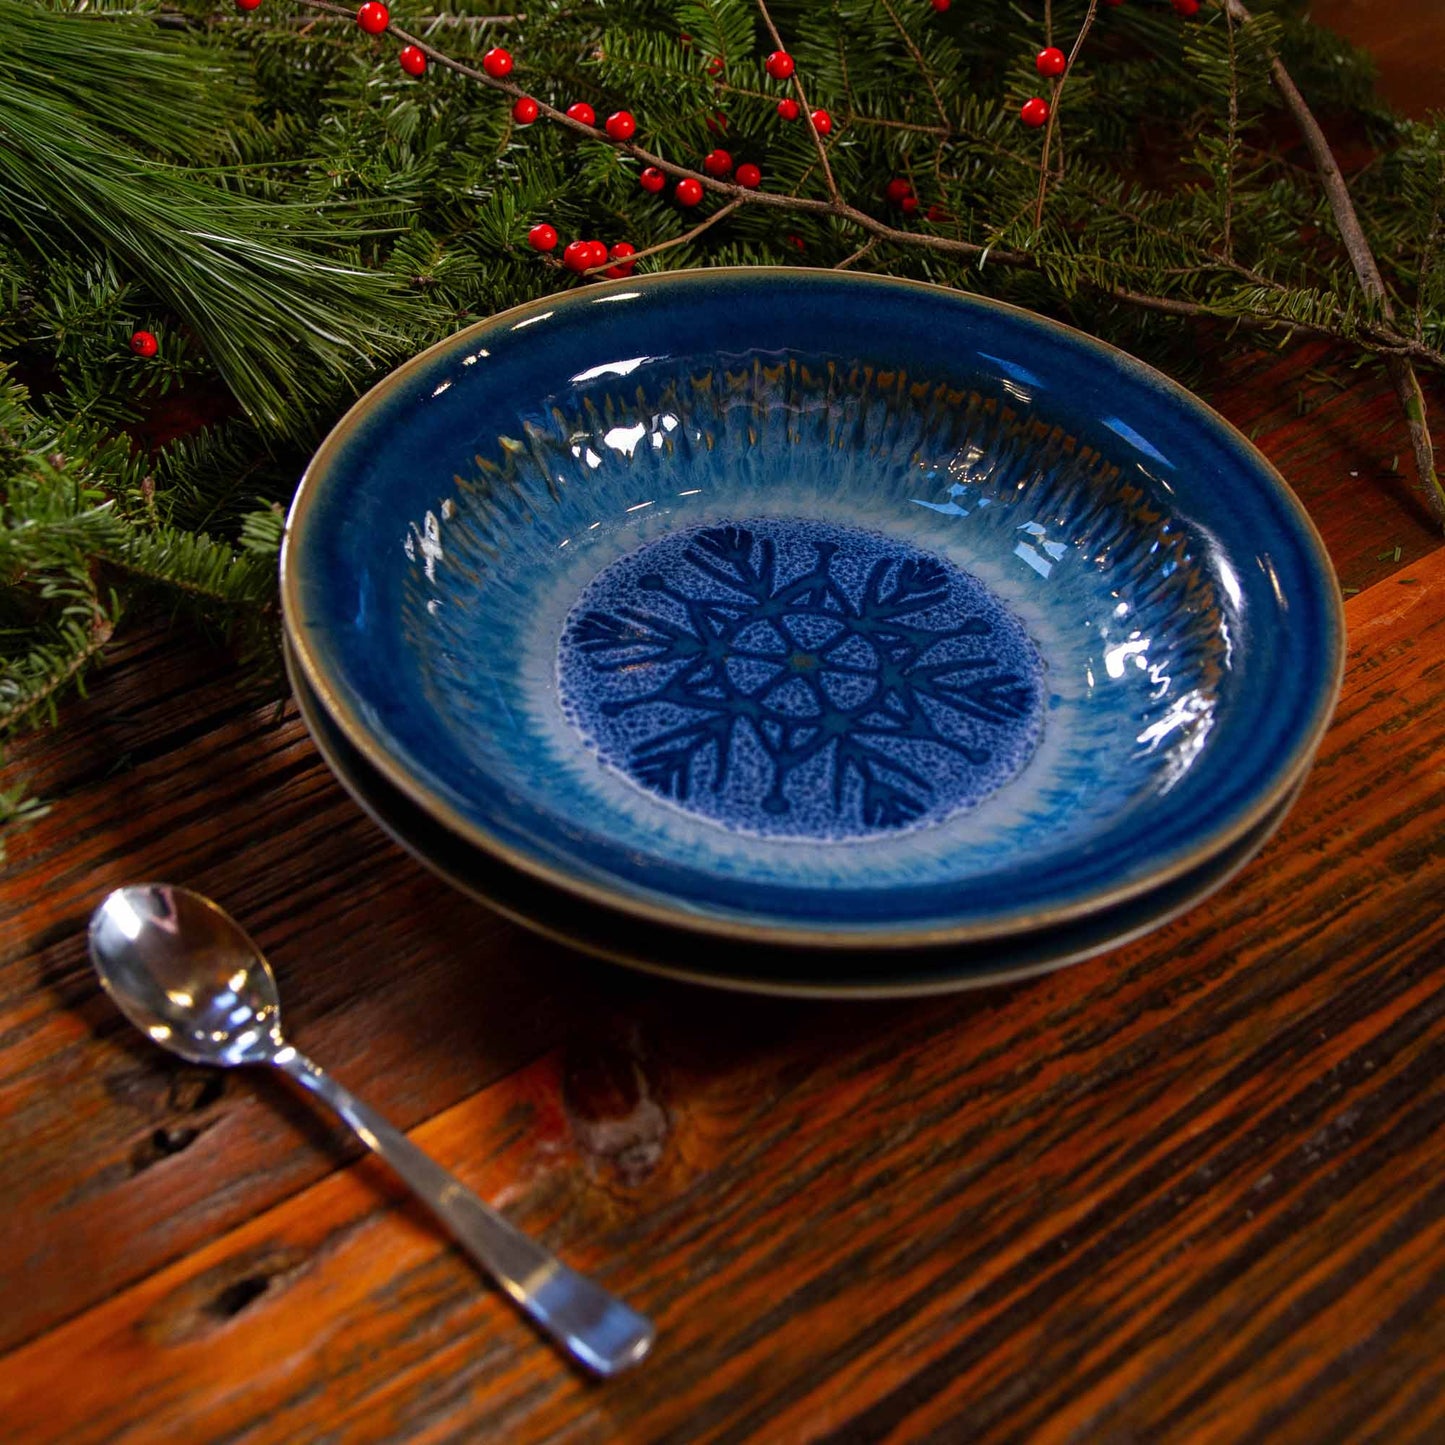 Set - 2 Individual Pasta Bowls in Chattered Blue Snowflake